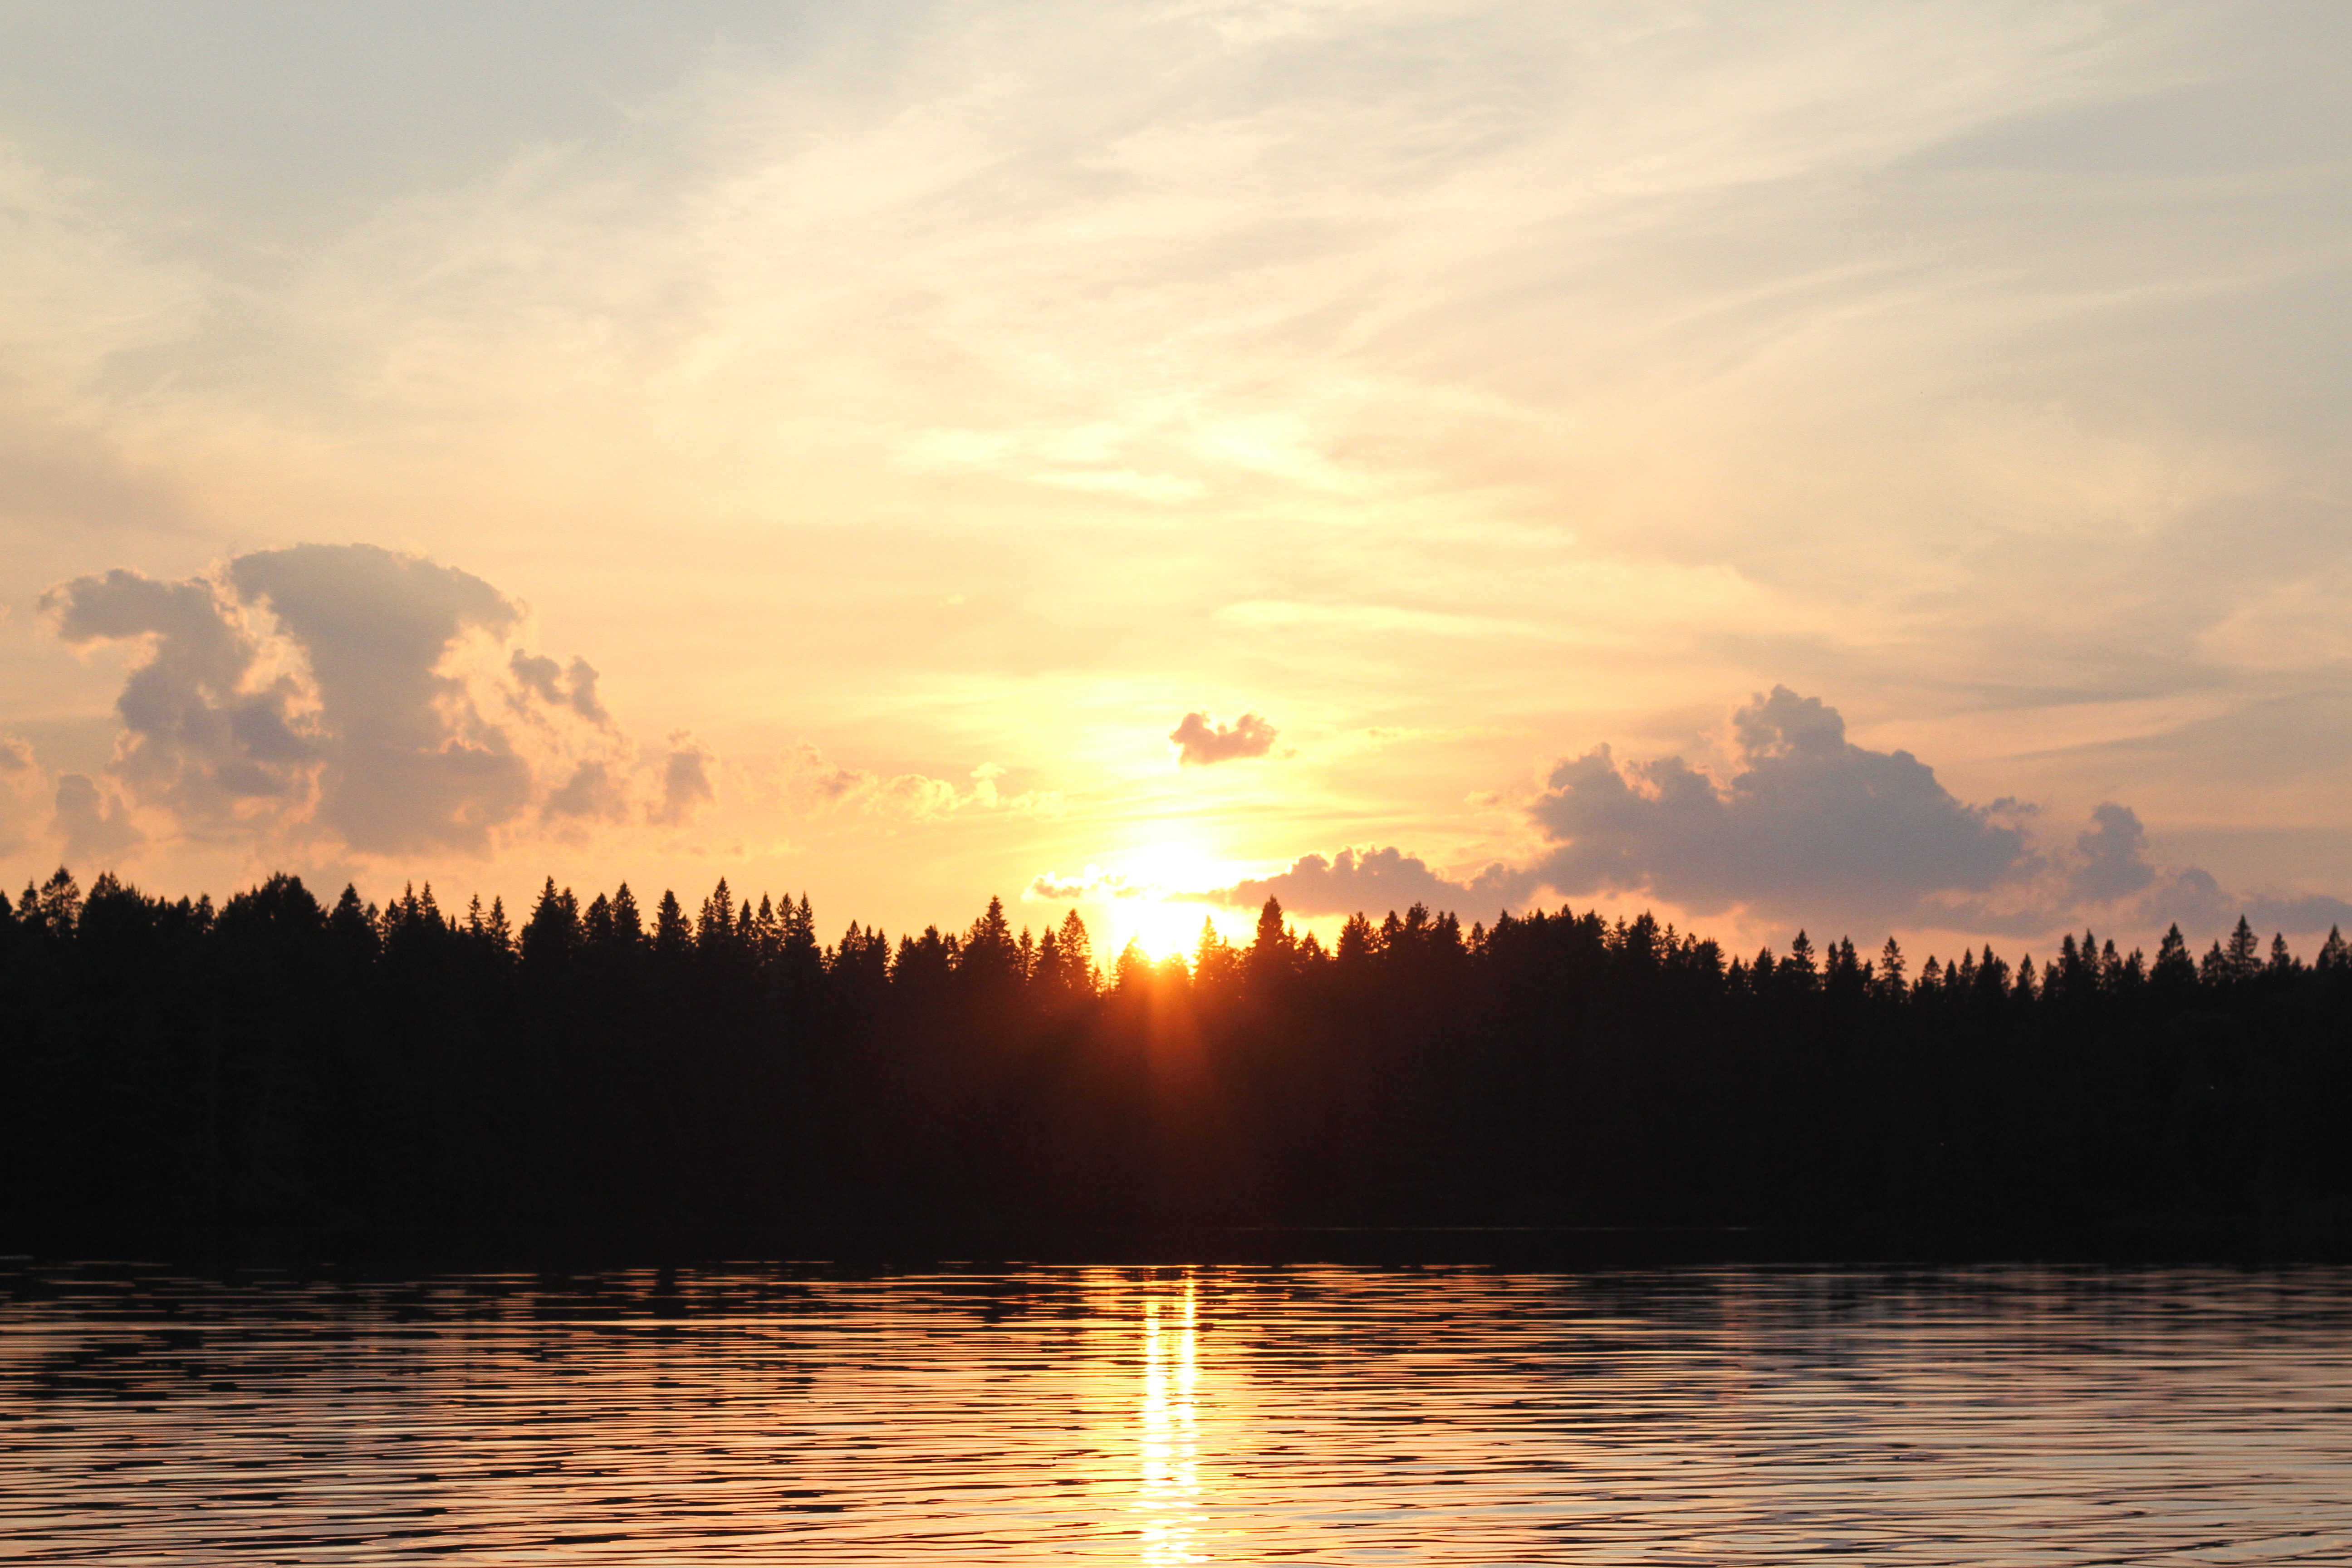 Sun over lake surrounded by forest